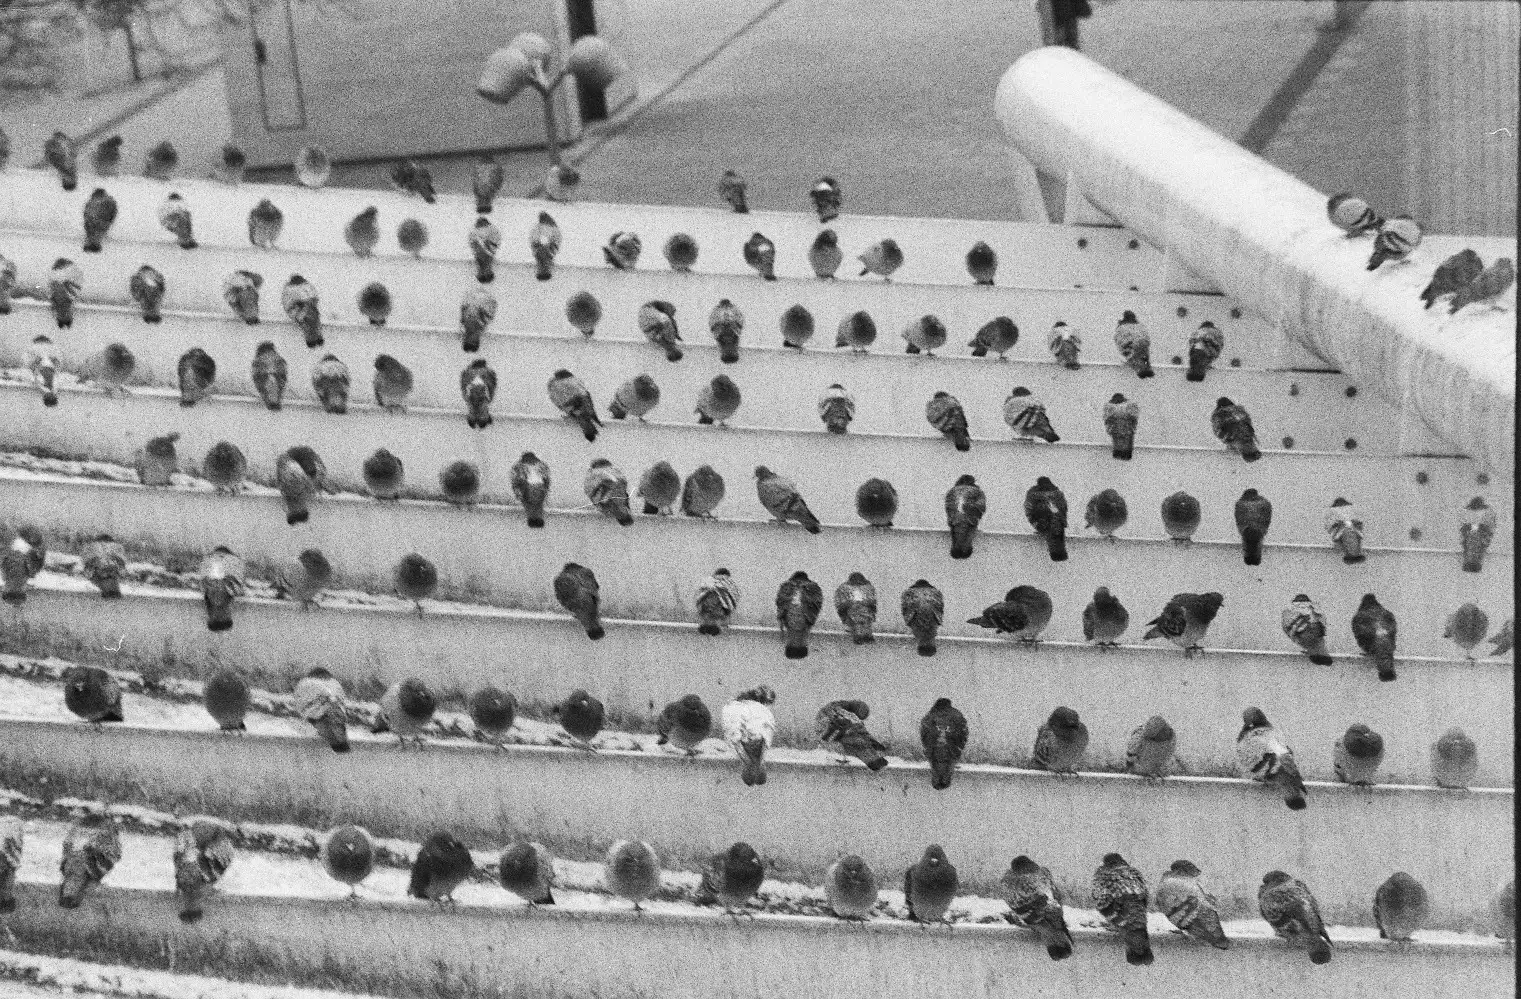 Social Distance (of pigeons)